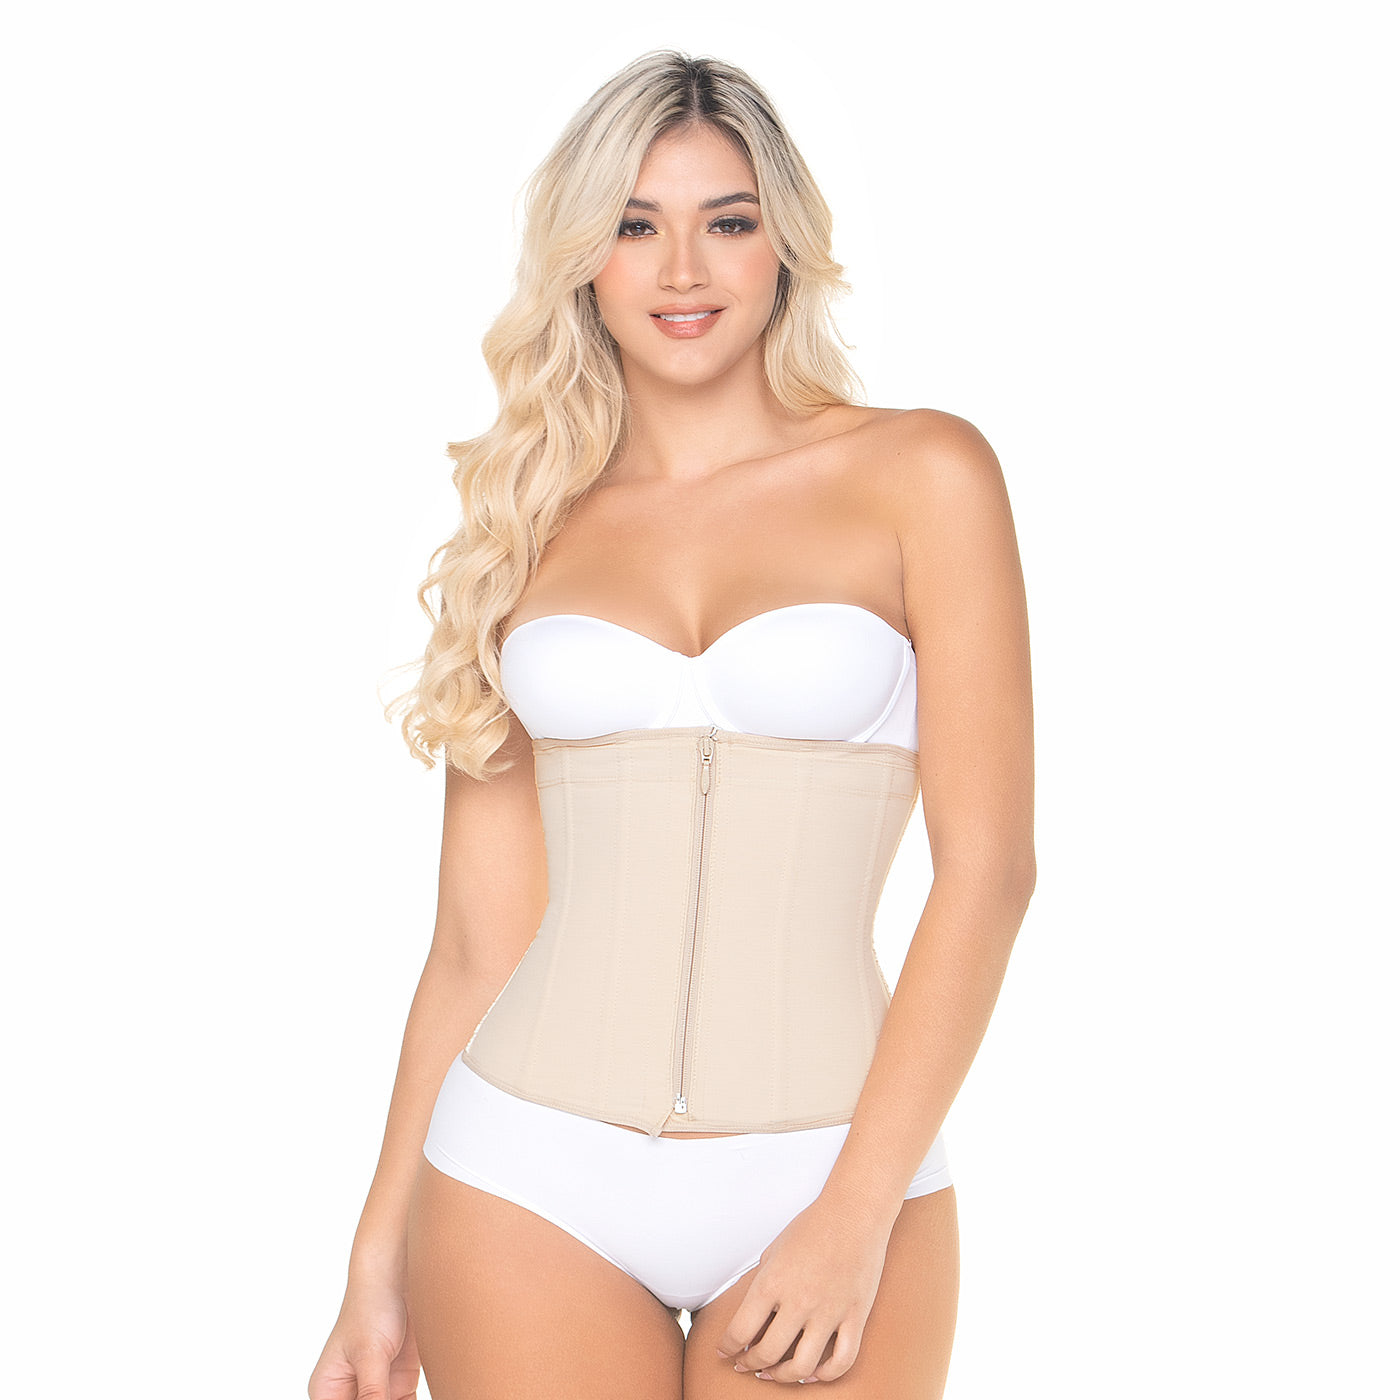 Fajas MariaE 9531, Colombian Shapewear, Postpartum and Daily Use